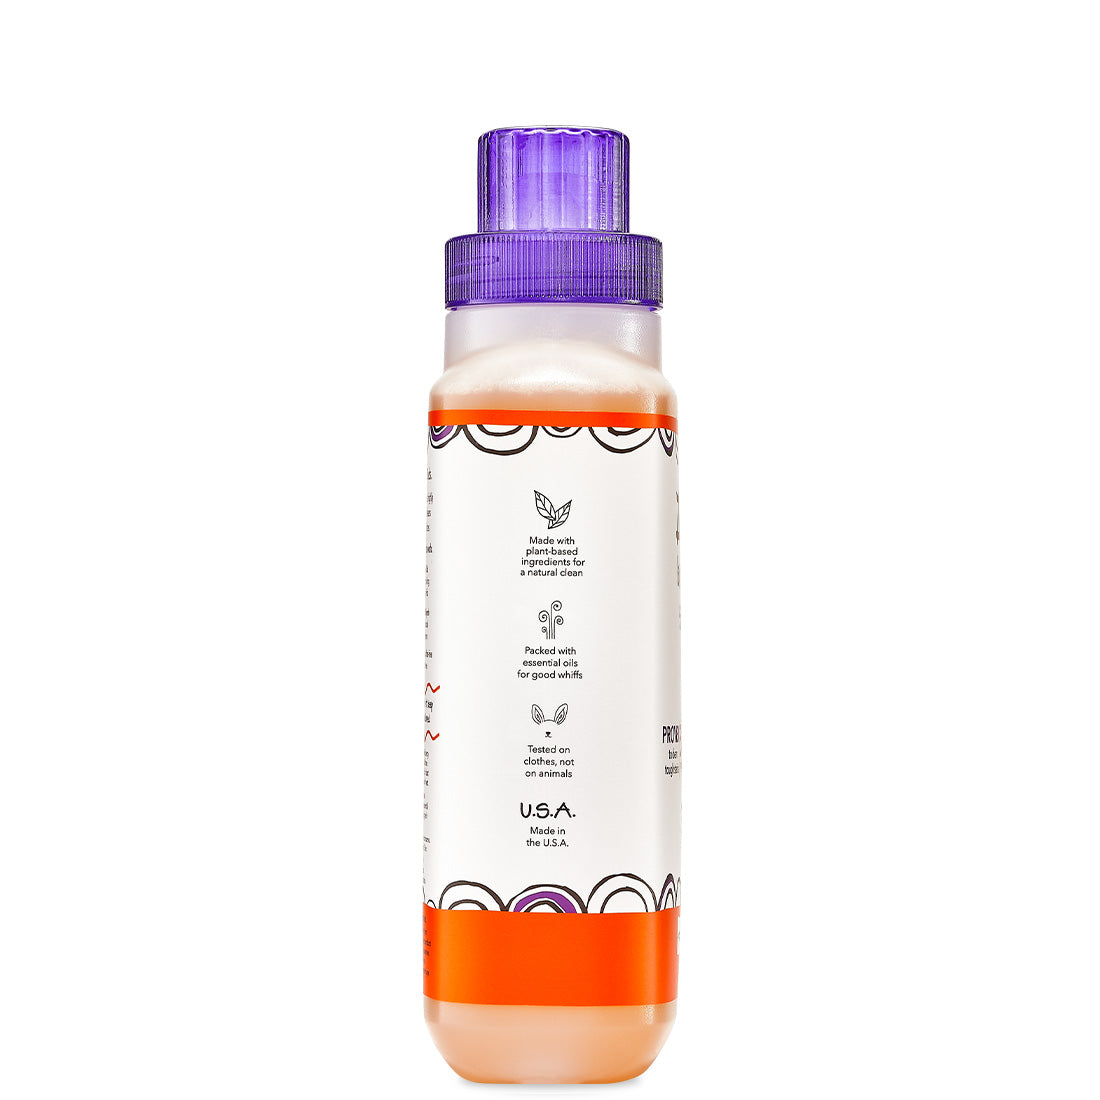 Side view of small bottle with screw cap that contains Patchouli Zum Laundry Soap